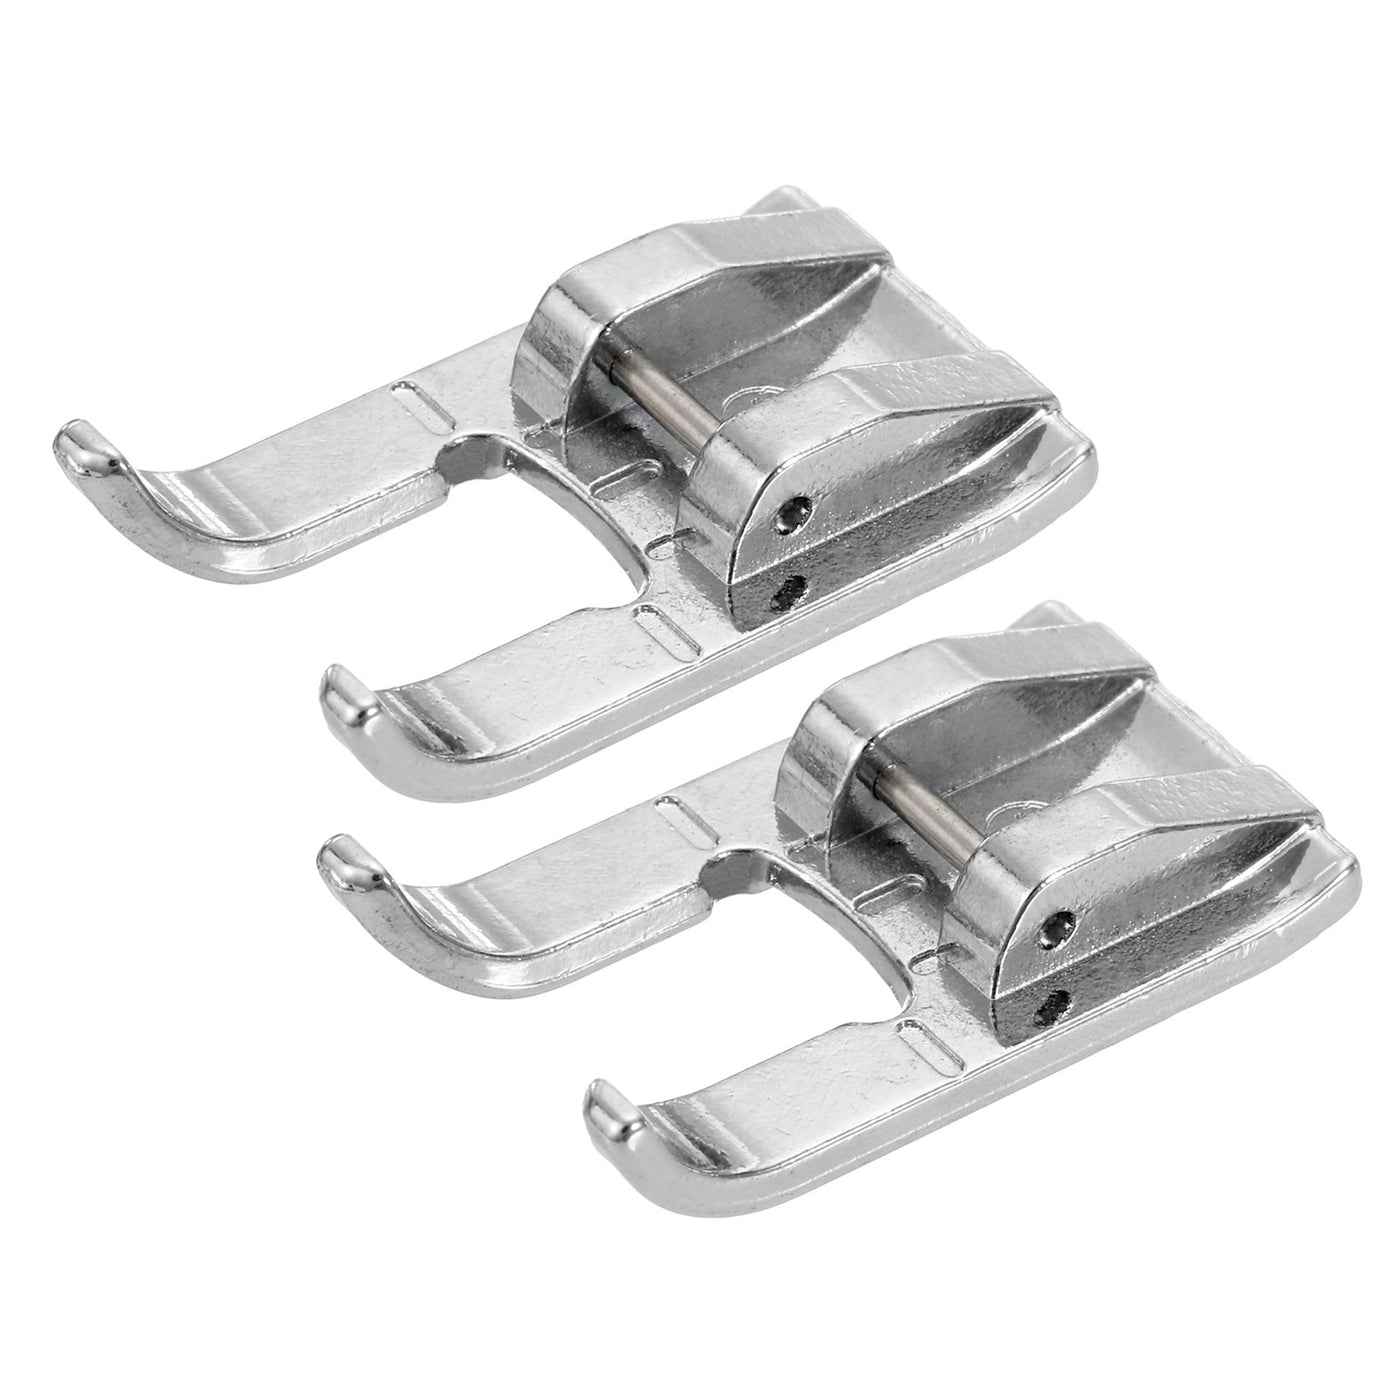 uxcell Uxcell Open Toe Foot Sewing Machine Foot Galvanized Iron Presser Foot 32x18mm, 2Pcs